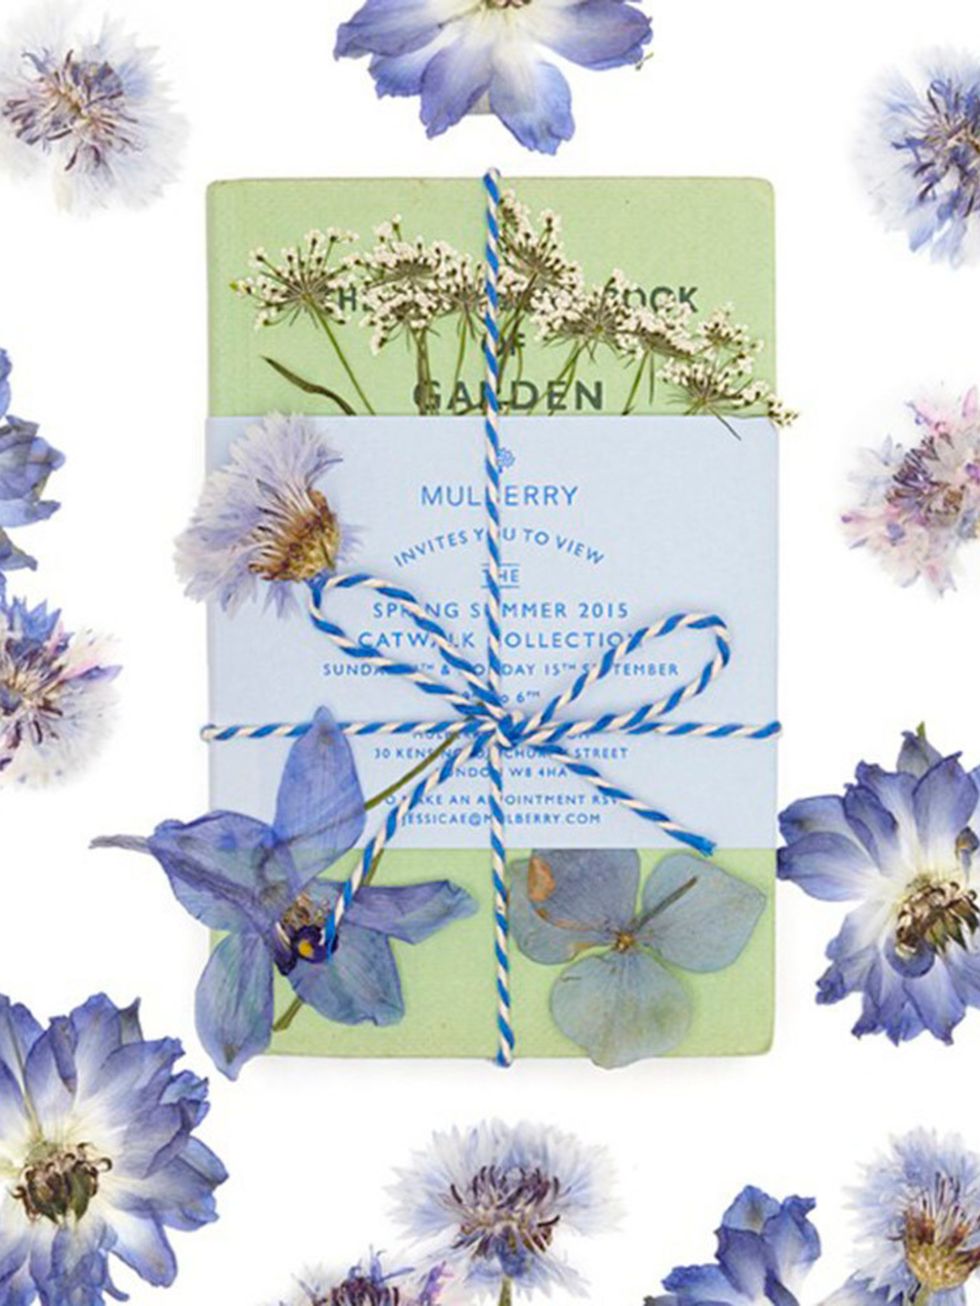 Mulberry 
(@mulberry editor)

'Discover the story of our beautiful #MulberrySS15 #LFW invitations on mulberry.com/Journal'